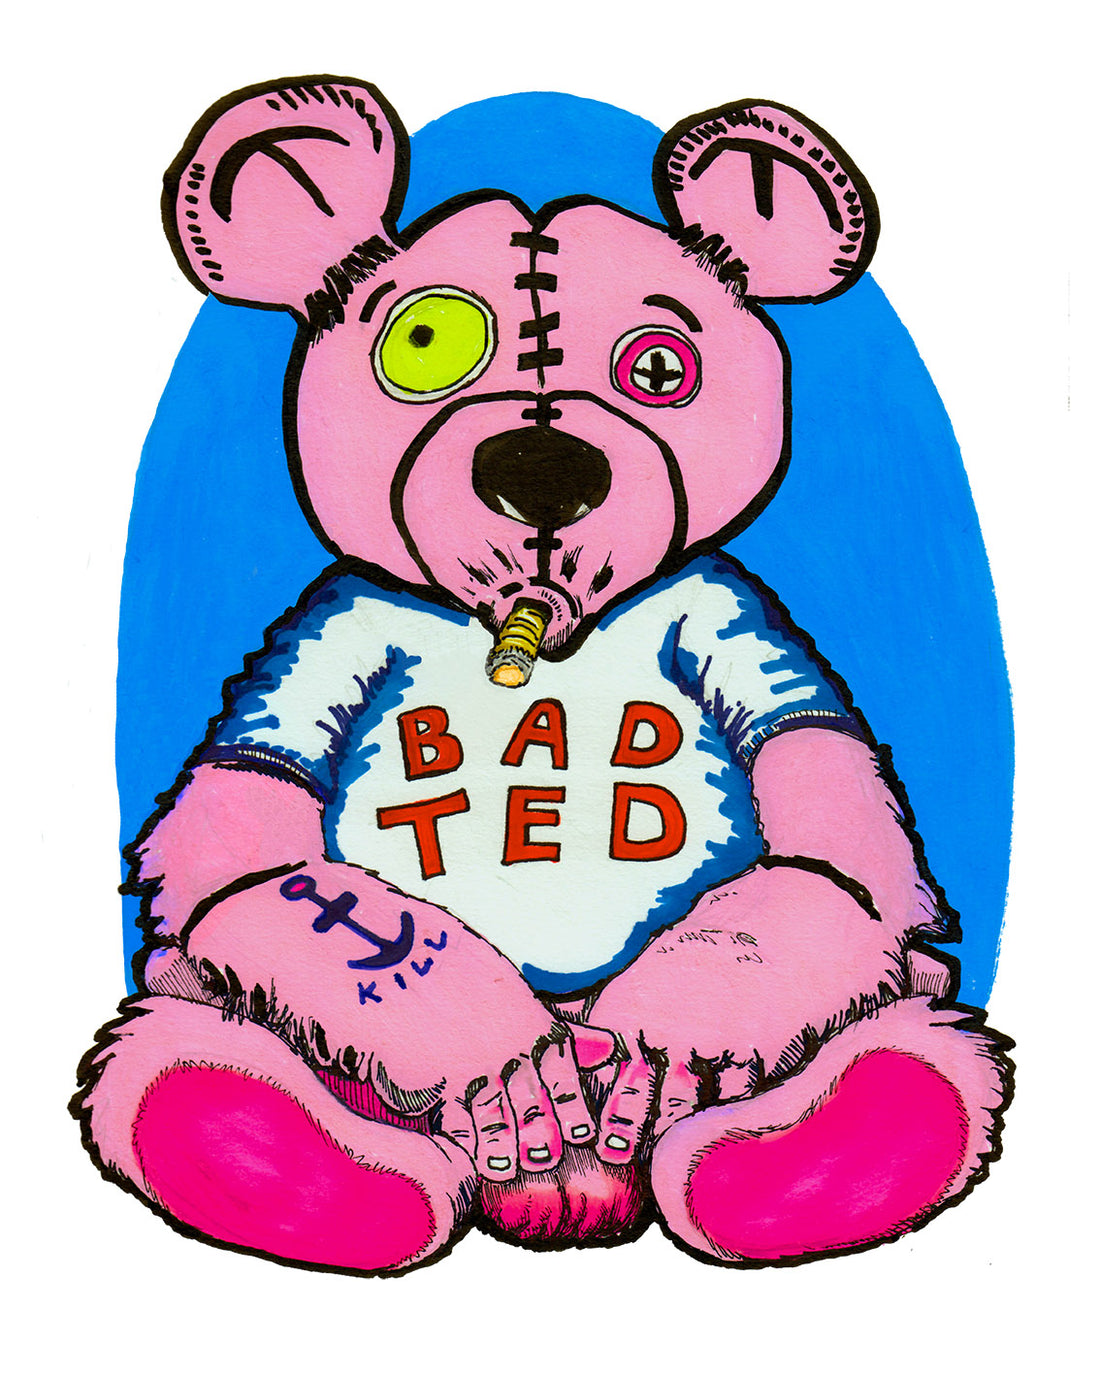 Bad Ted an origin story